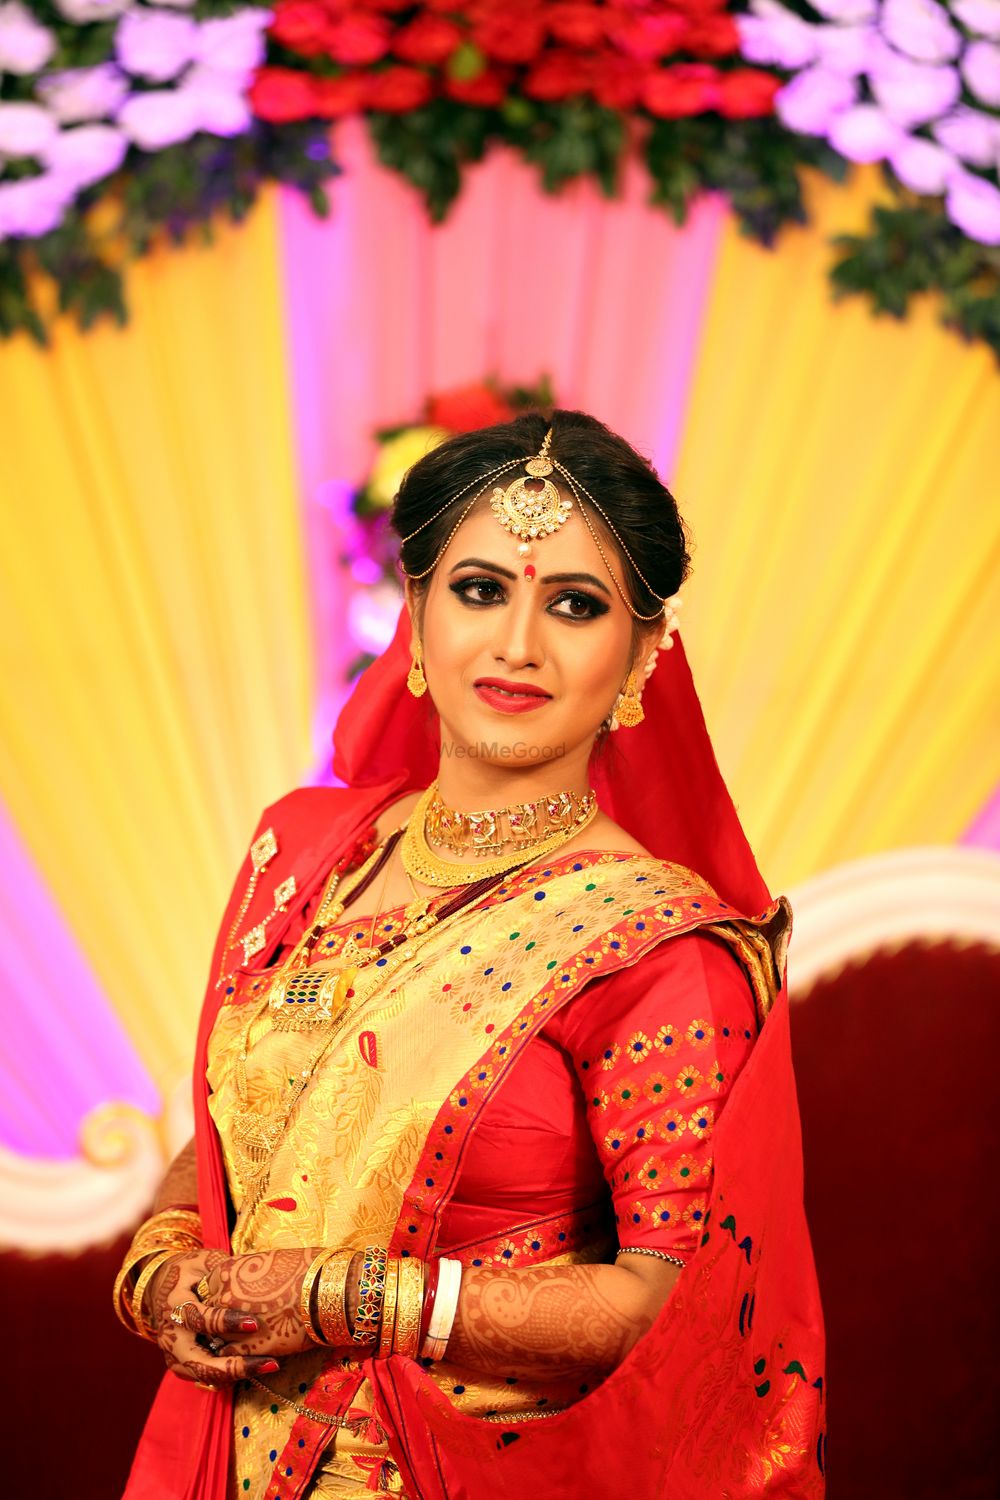 Photo From The bride of wedding - By Tilak Medhi Photography